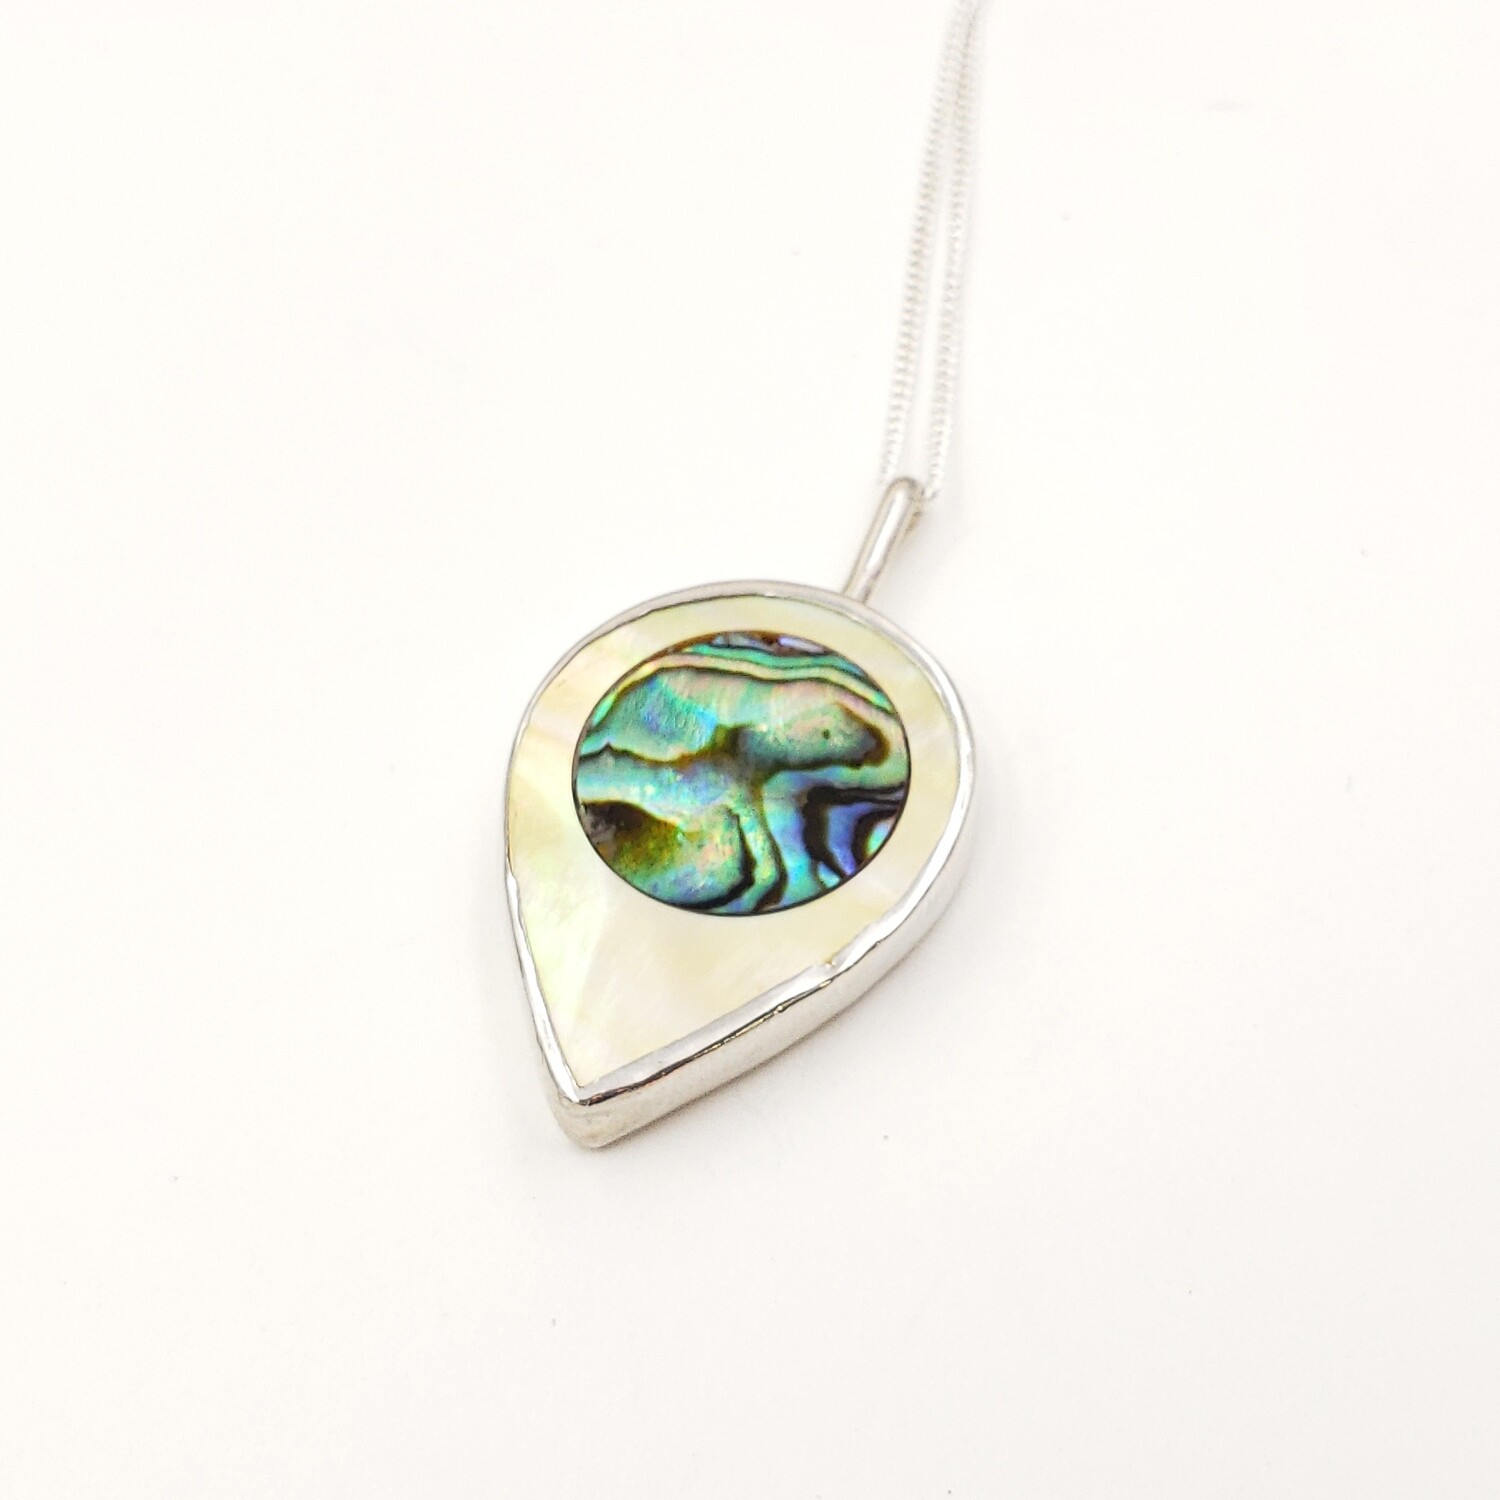 Bezel-set Mother of Pearl Teardrop with Abalone Inlay Necklace